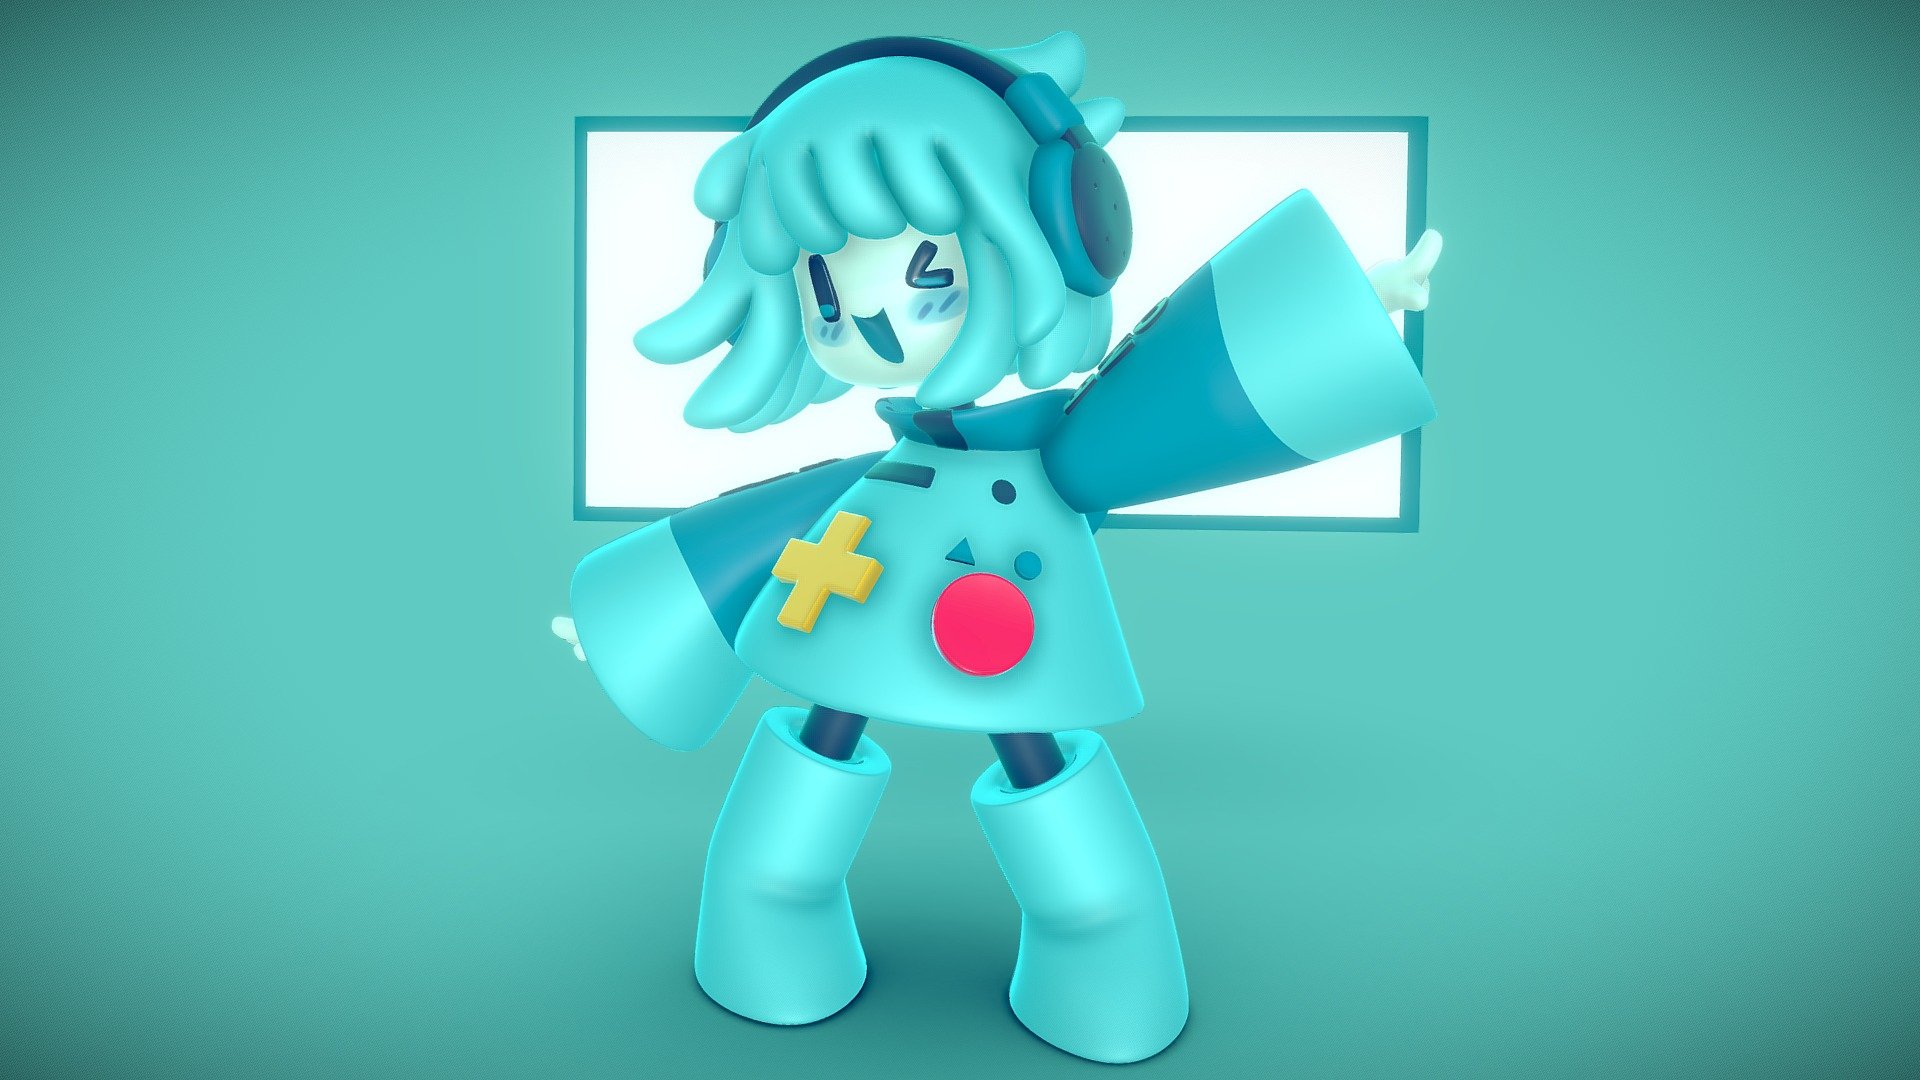 Heyy! I really  loved tthis bmo desing!
based from @RealDazzen redesign of BMO. 
and @momoiiroo &lsquo;s fan art   - BMO from adventure time Dazzen's Redesign - 3D model by Gabrielgt16 3d model